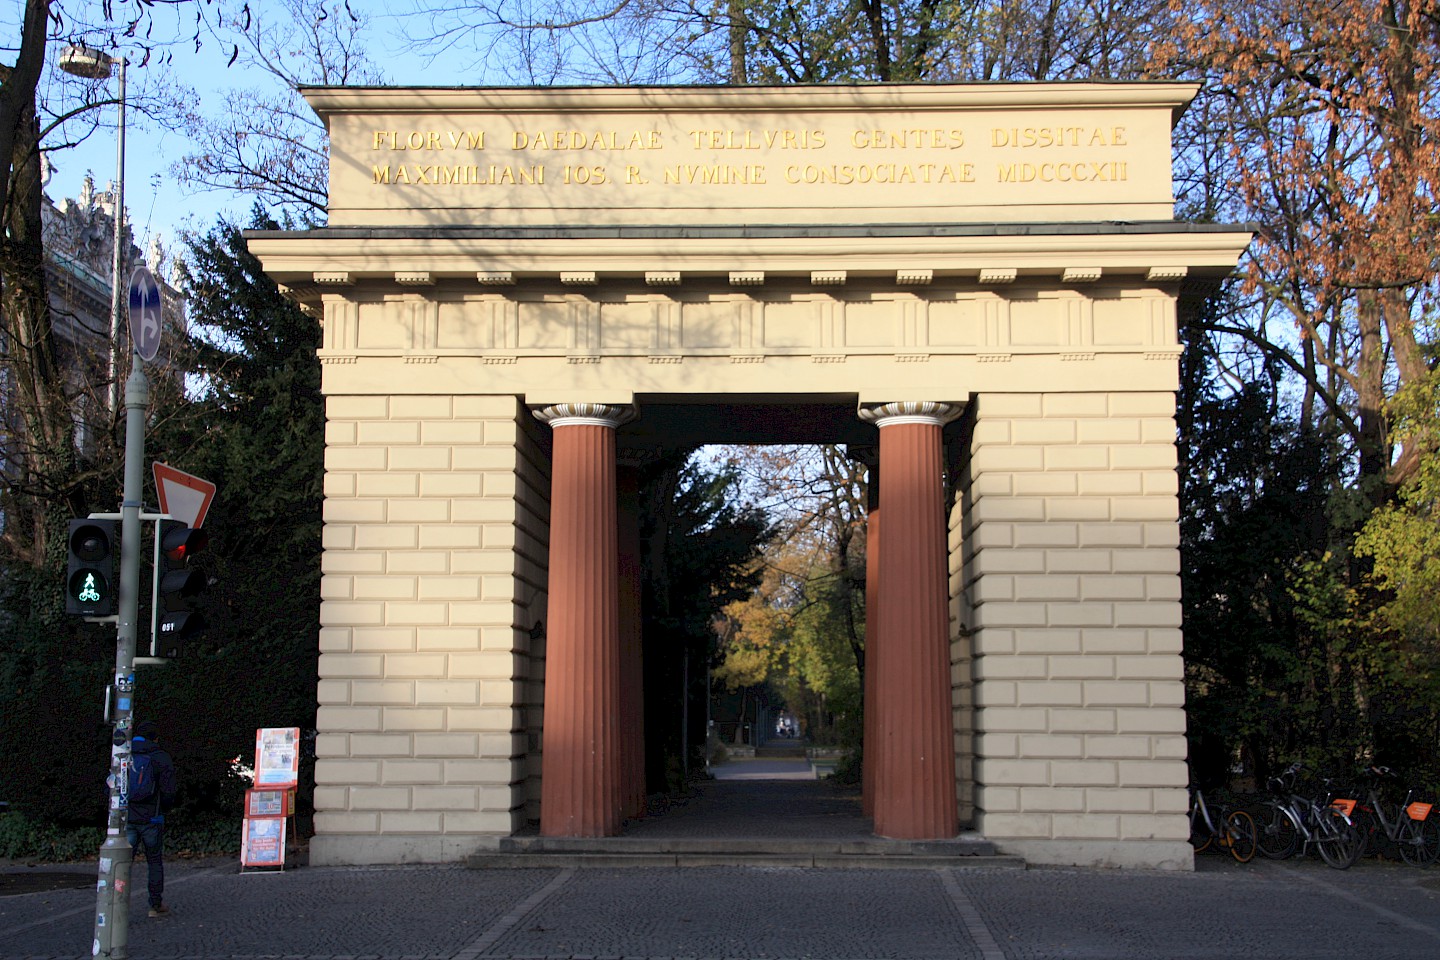 The entrance to the old botanical garden